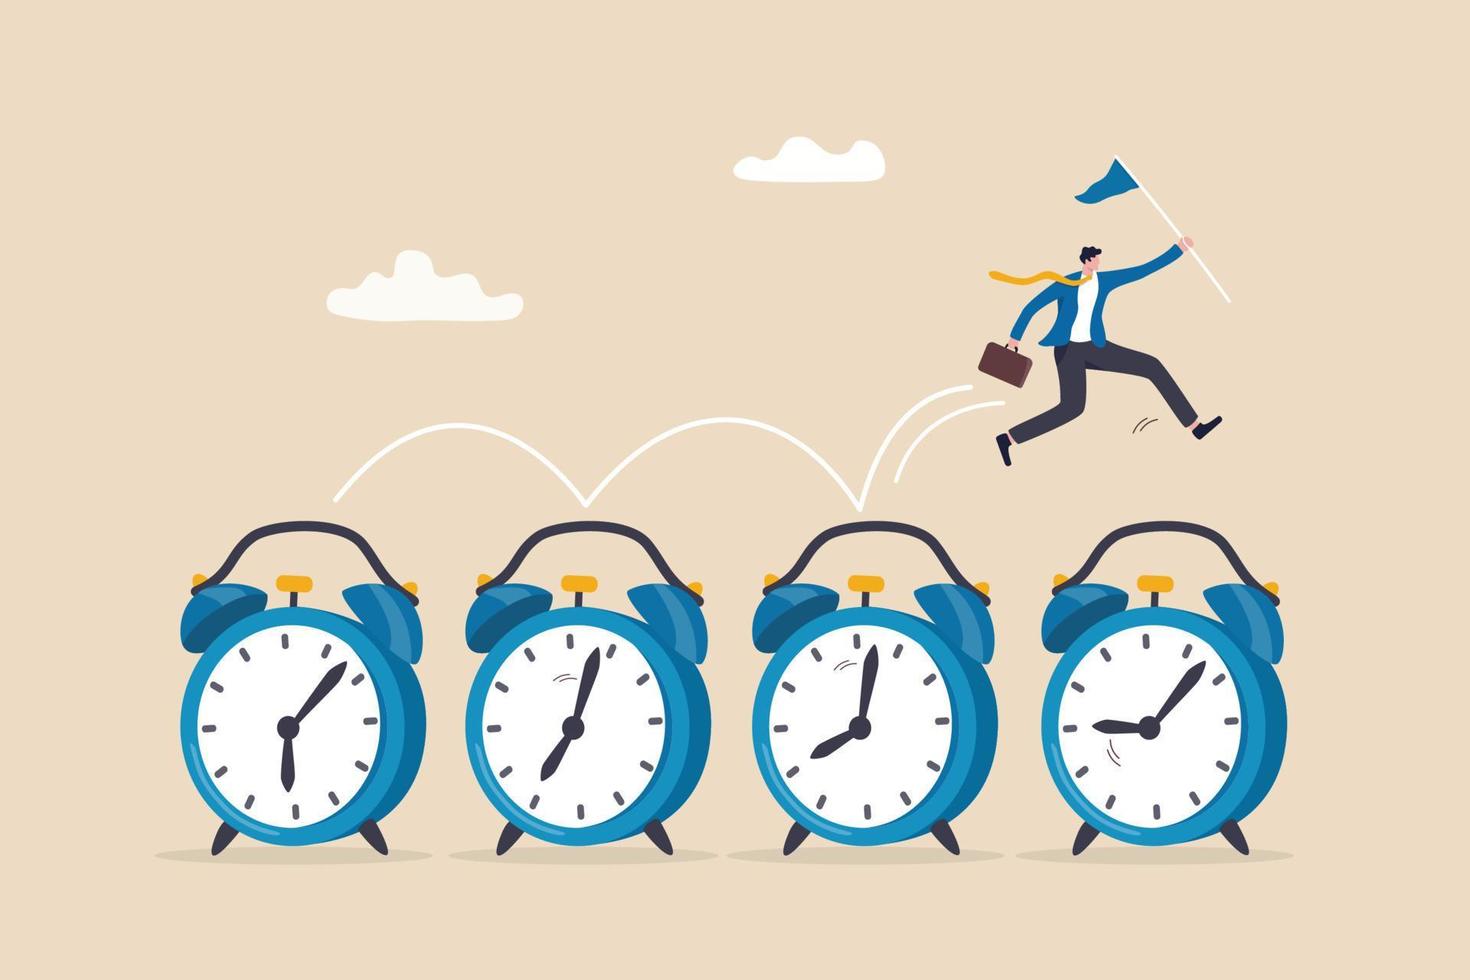 Time management, procrastination or work productivity, finish project within deadline, work efficiency or planning, fast pace project concept, businessman expert jumping on time passing alarm clock. vector